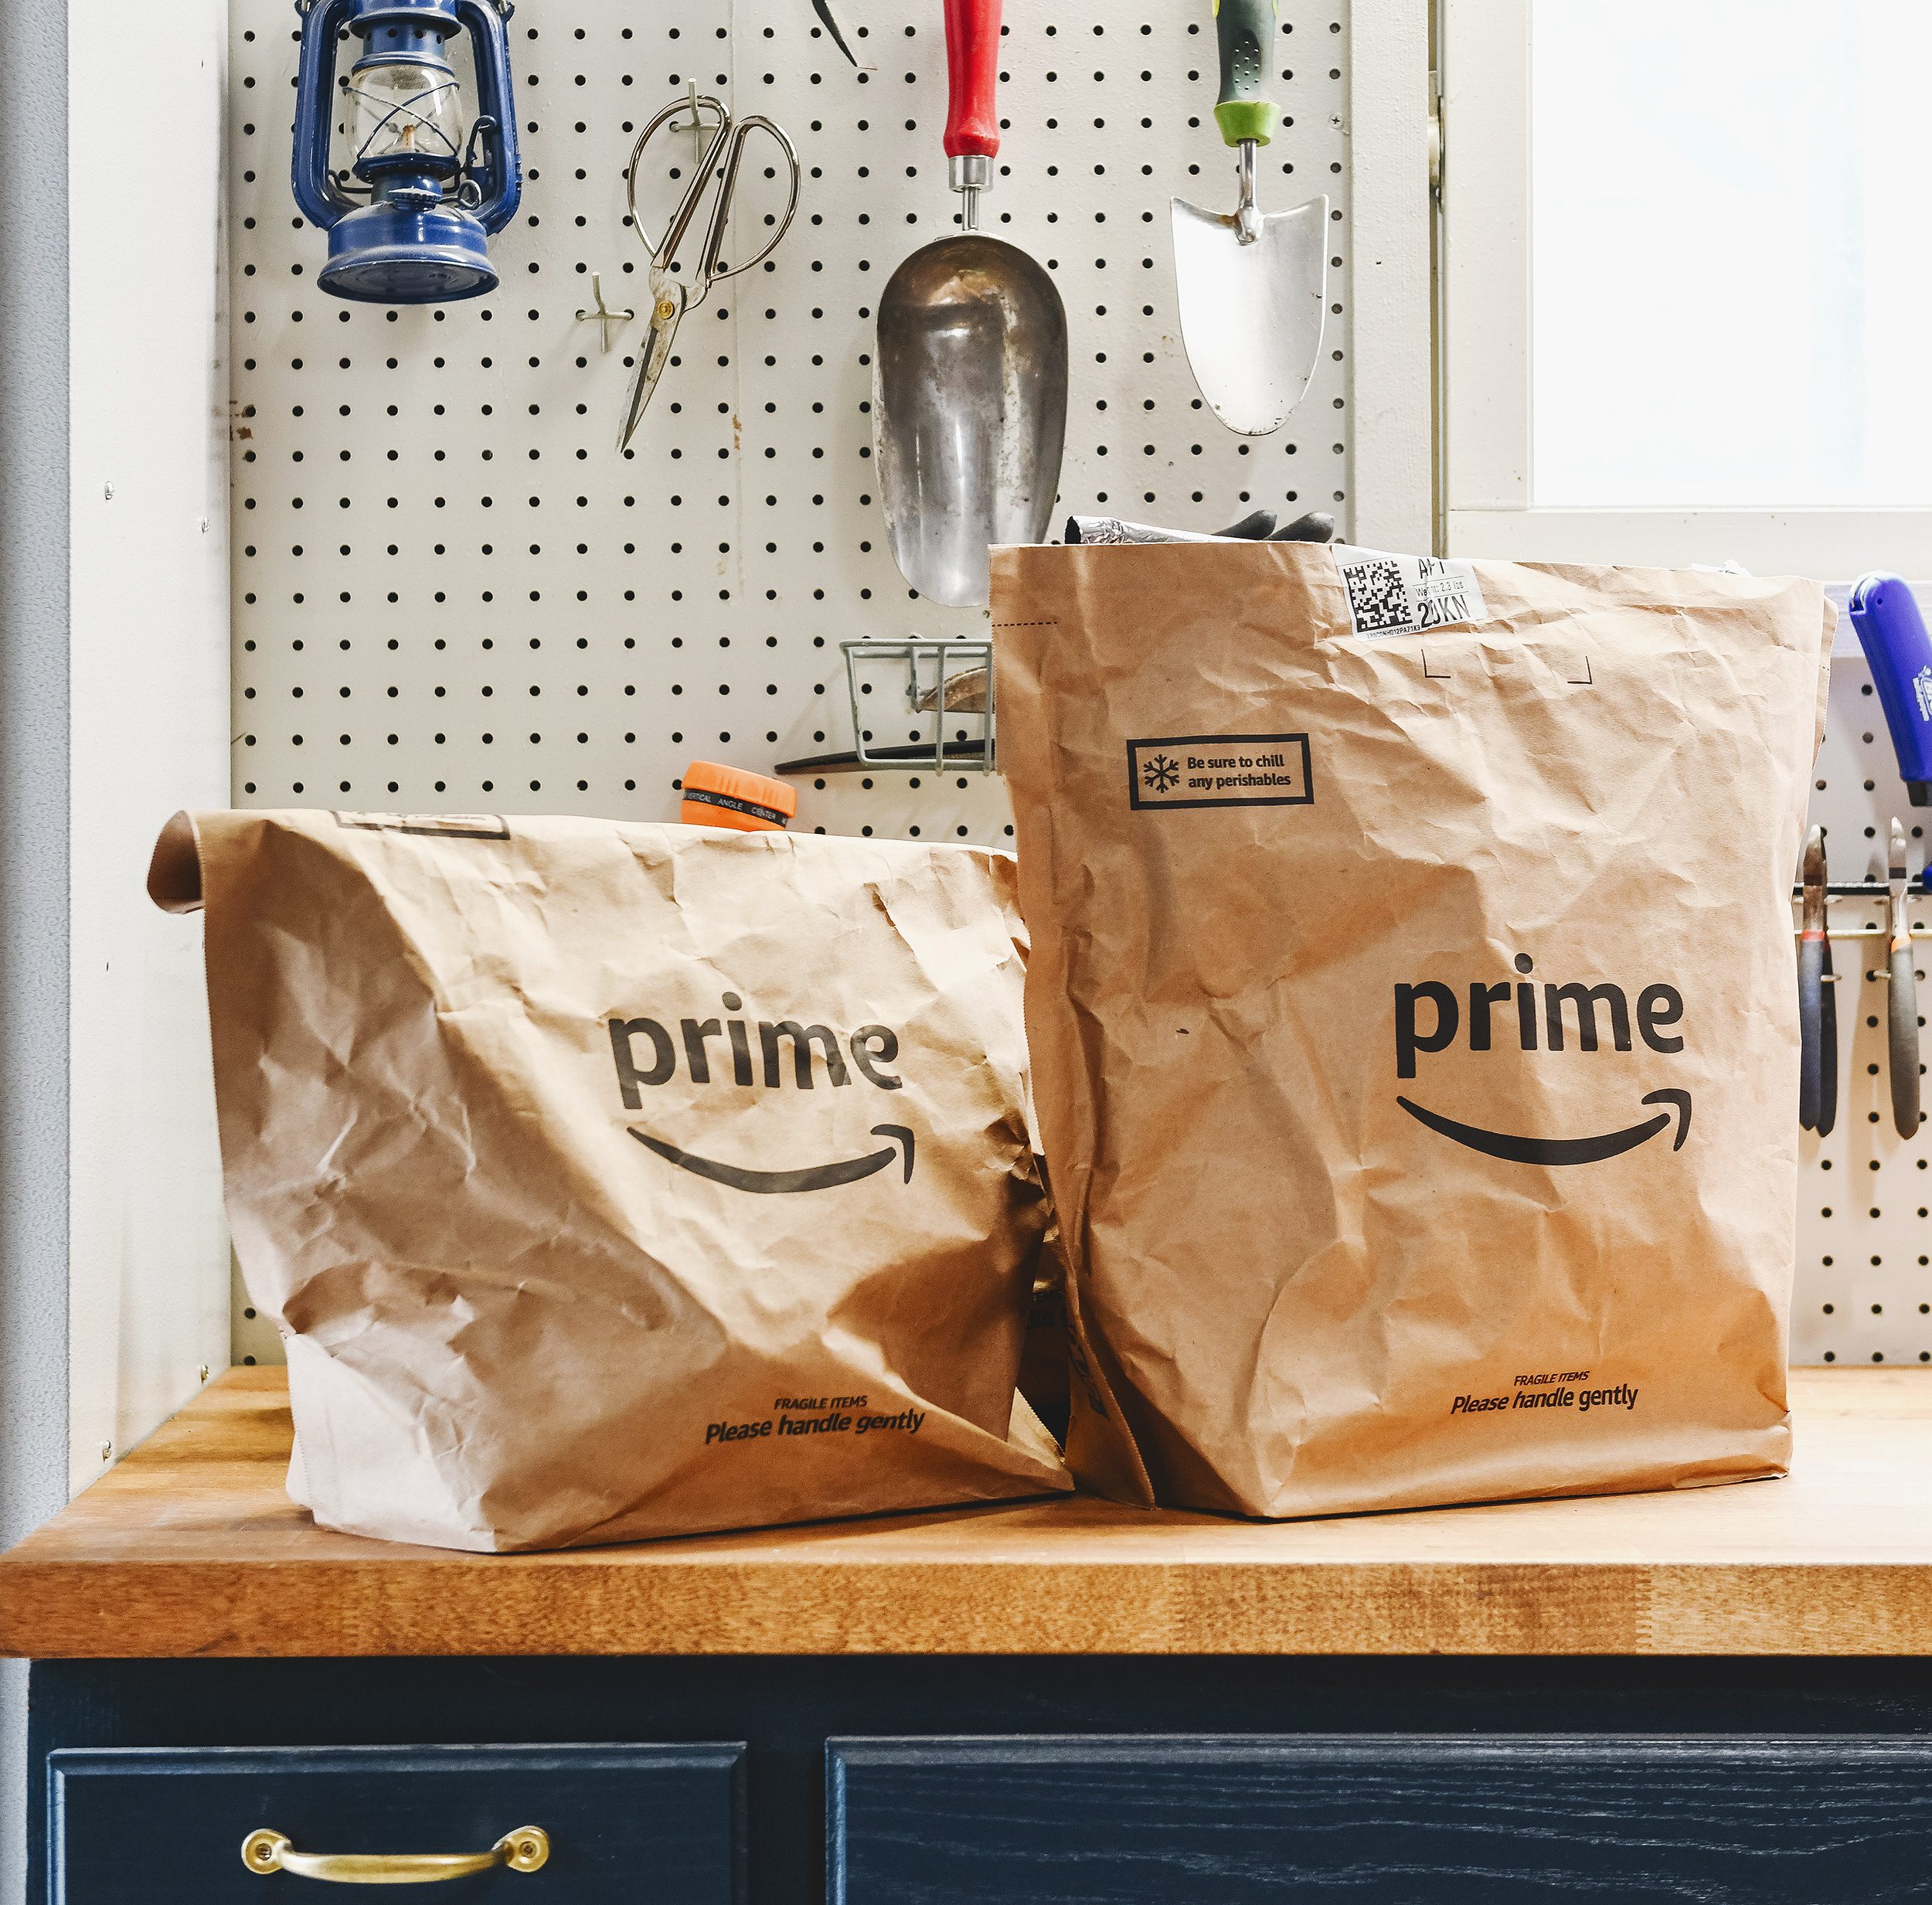 Linking the Key By Amazon app and the myQ app allows for In-Garage Delivery